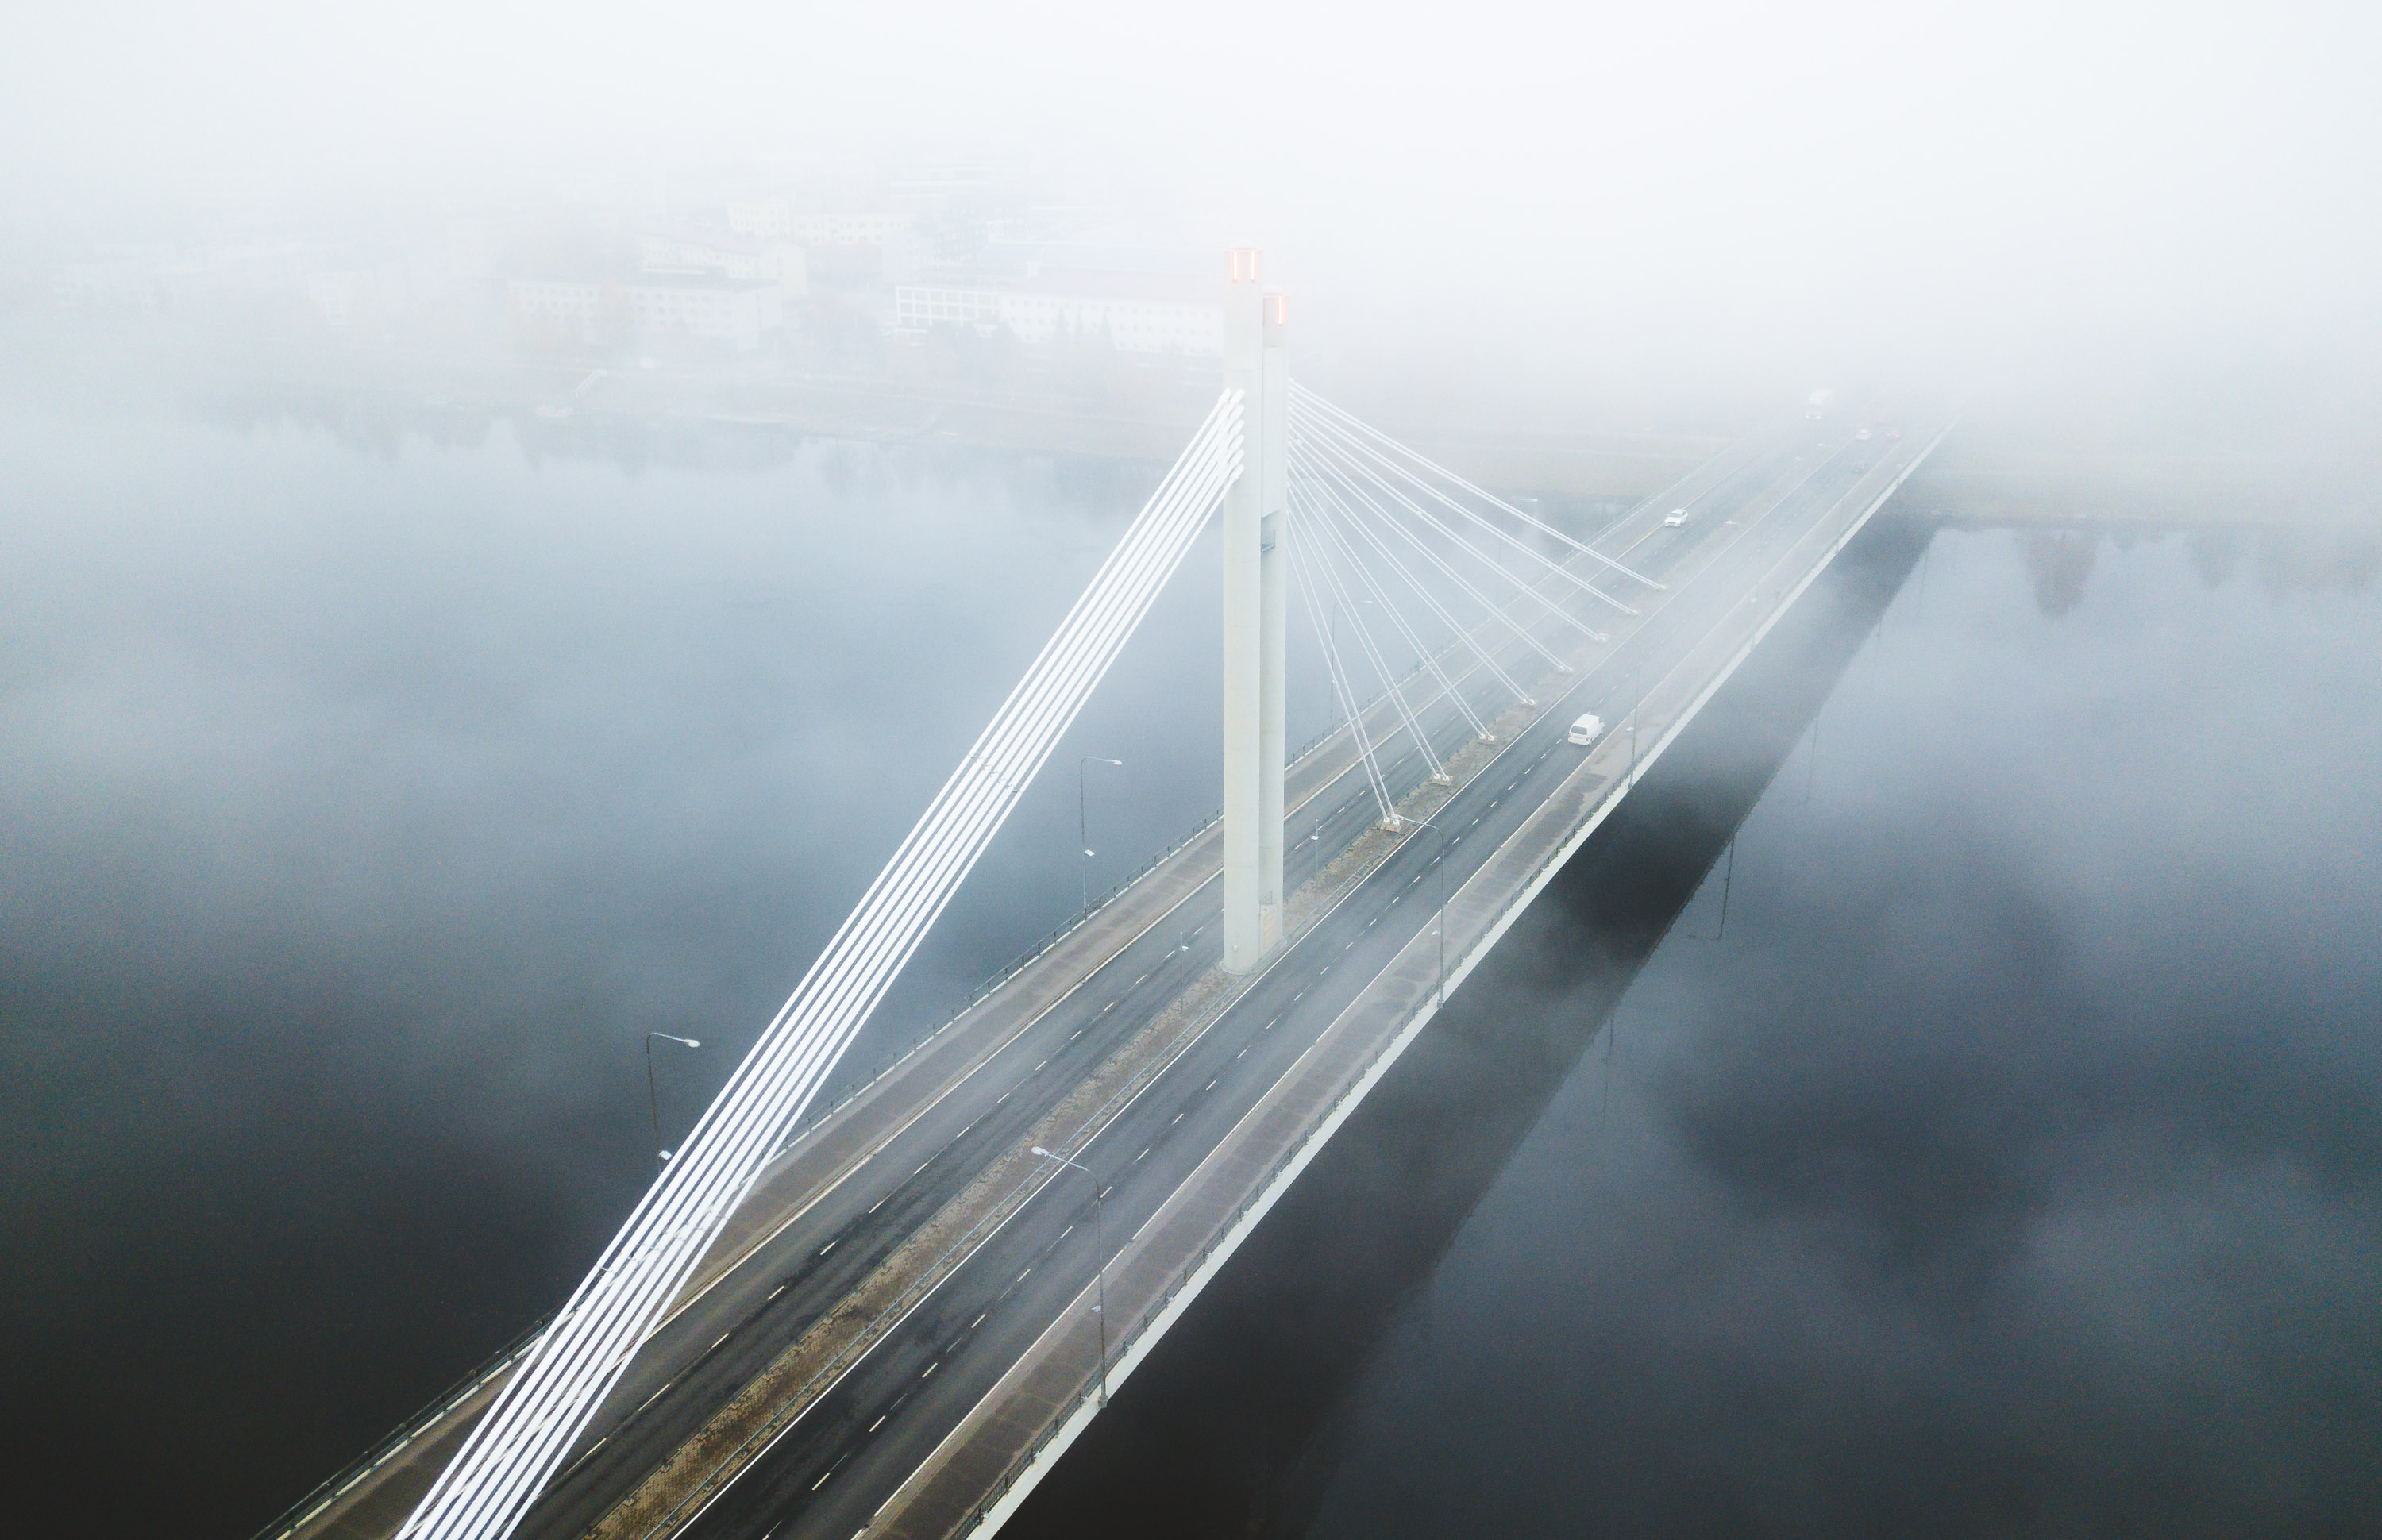 Lumberjack's Candle Bridge pictured from above during early winter with some mist in Rovaniemi, Lapland, Finland.